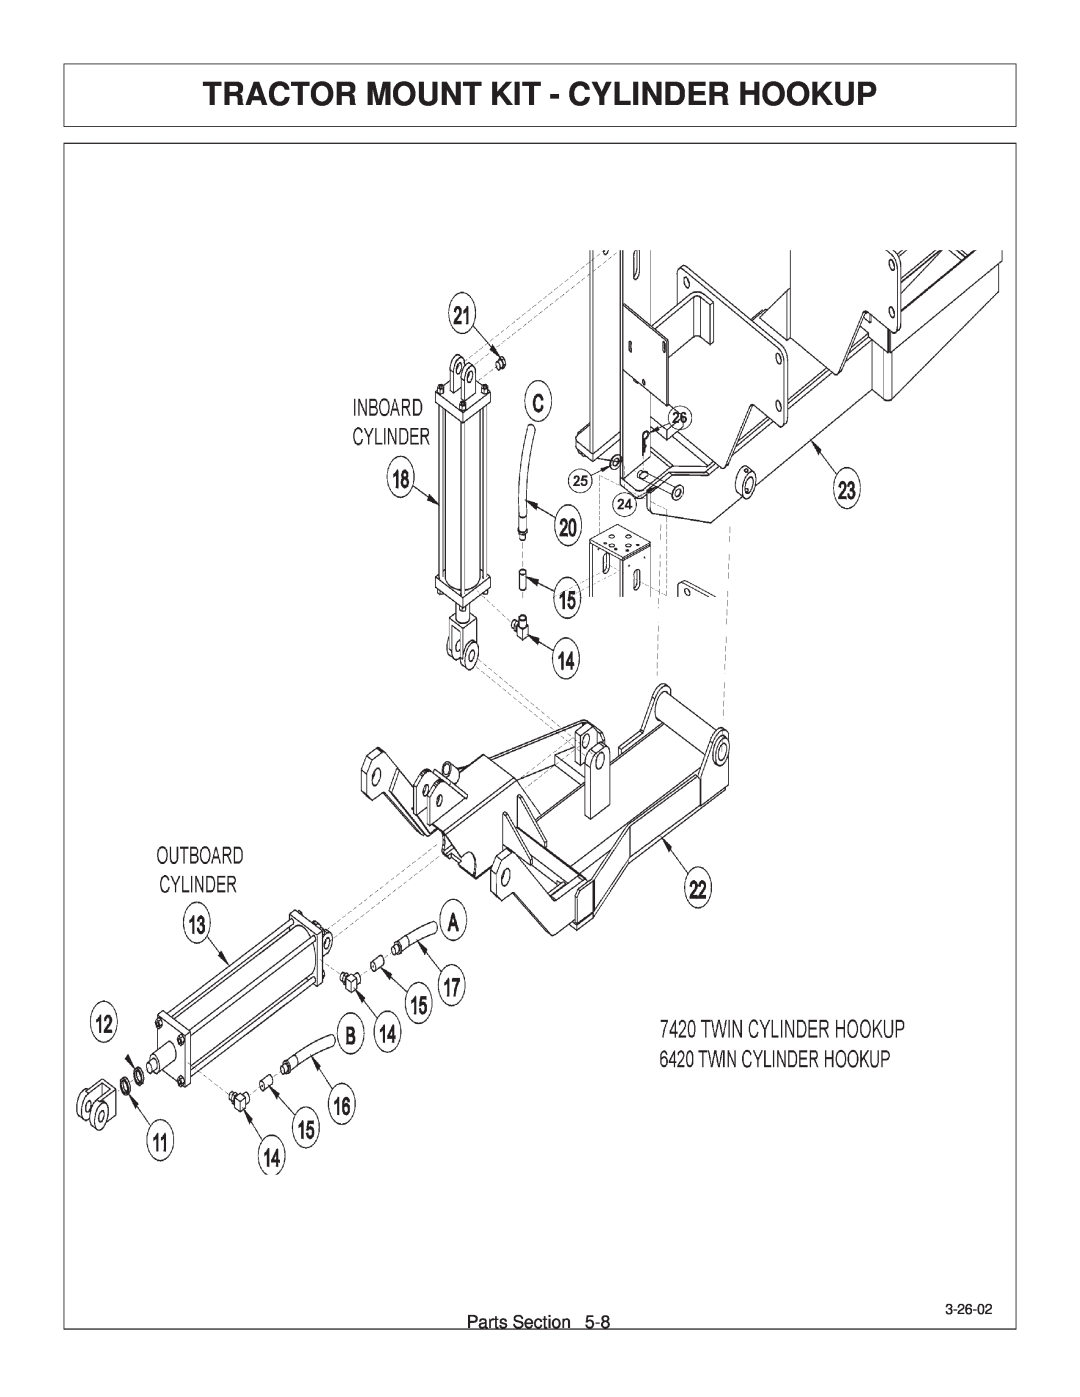 Tiger Products Co., Ltd JD 72-7520 manual Tractor Mount Kit - Cylinder Hookup, Parts Section, 3-26-02 